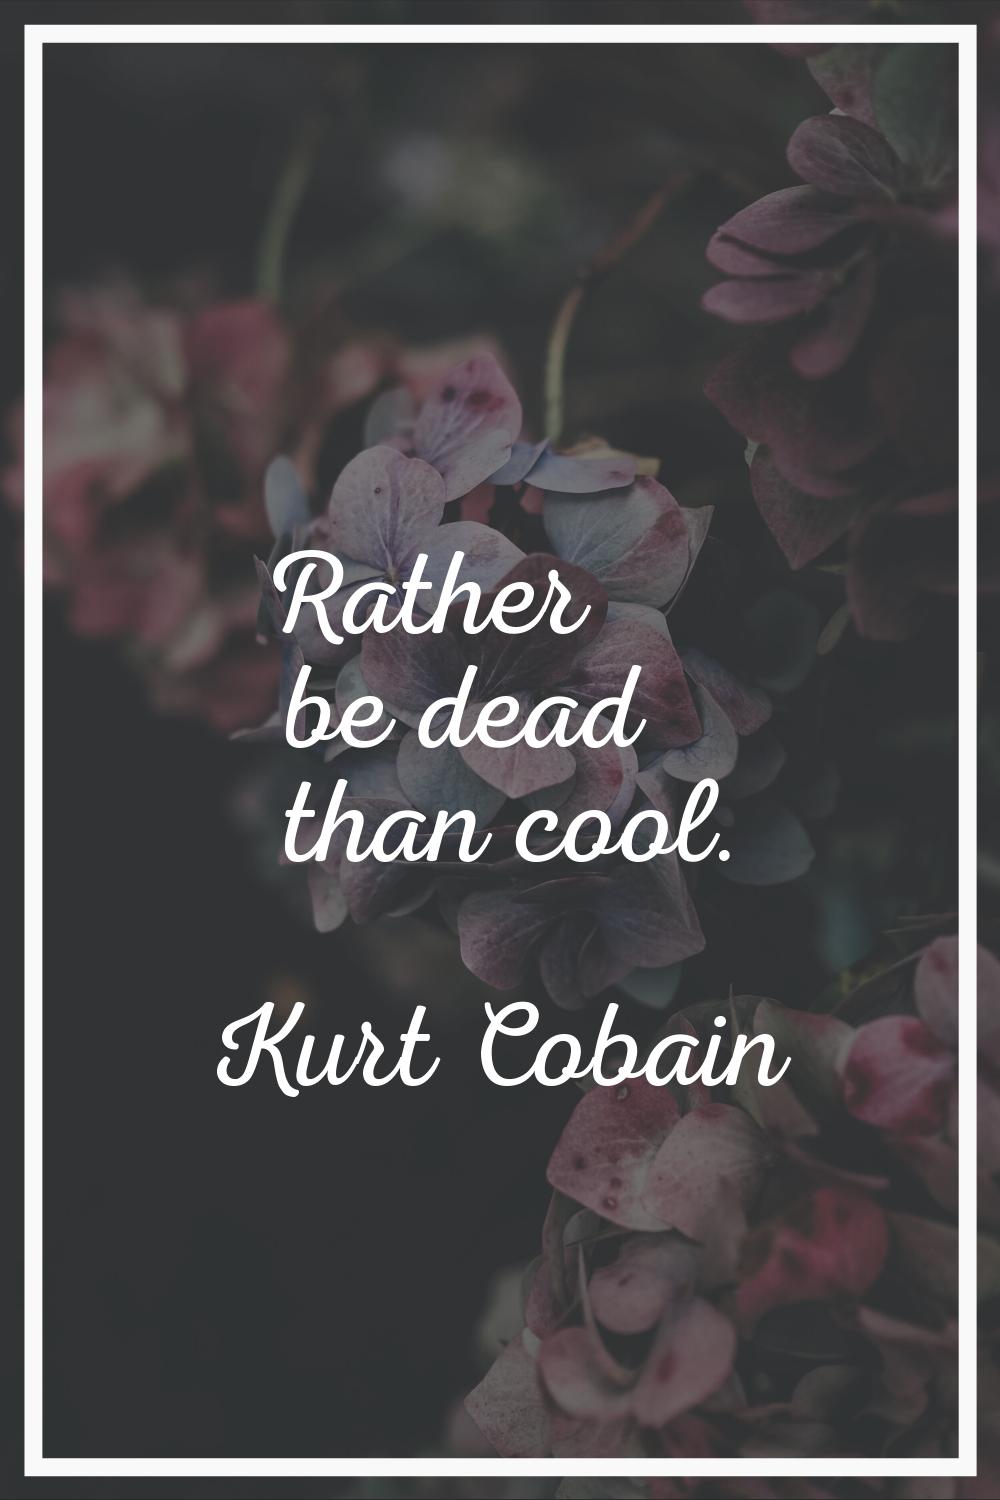 Rather be dead than cool.